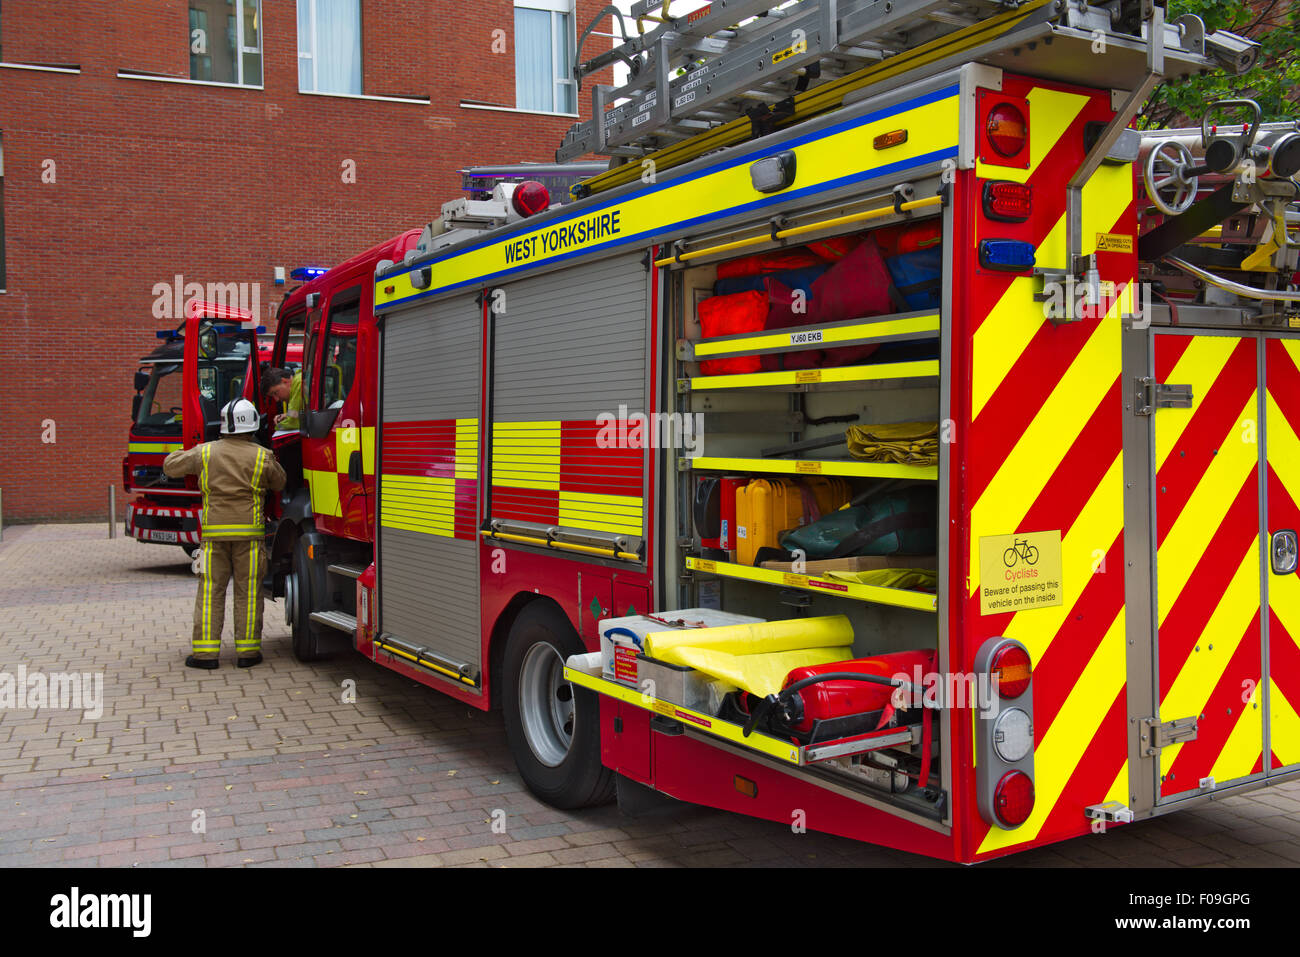 West Yorkshire fire service engines attending fire in Leeds Stock Photo